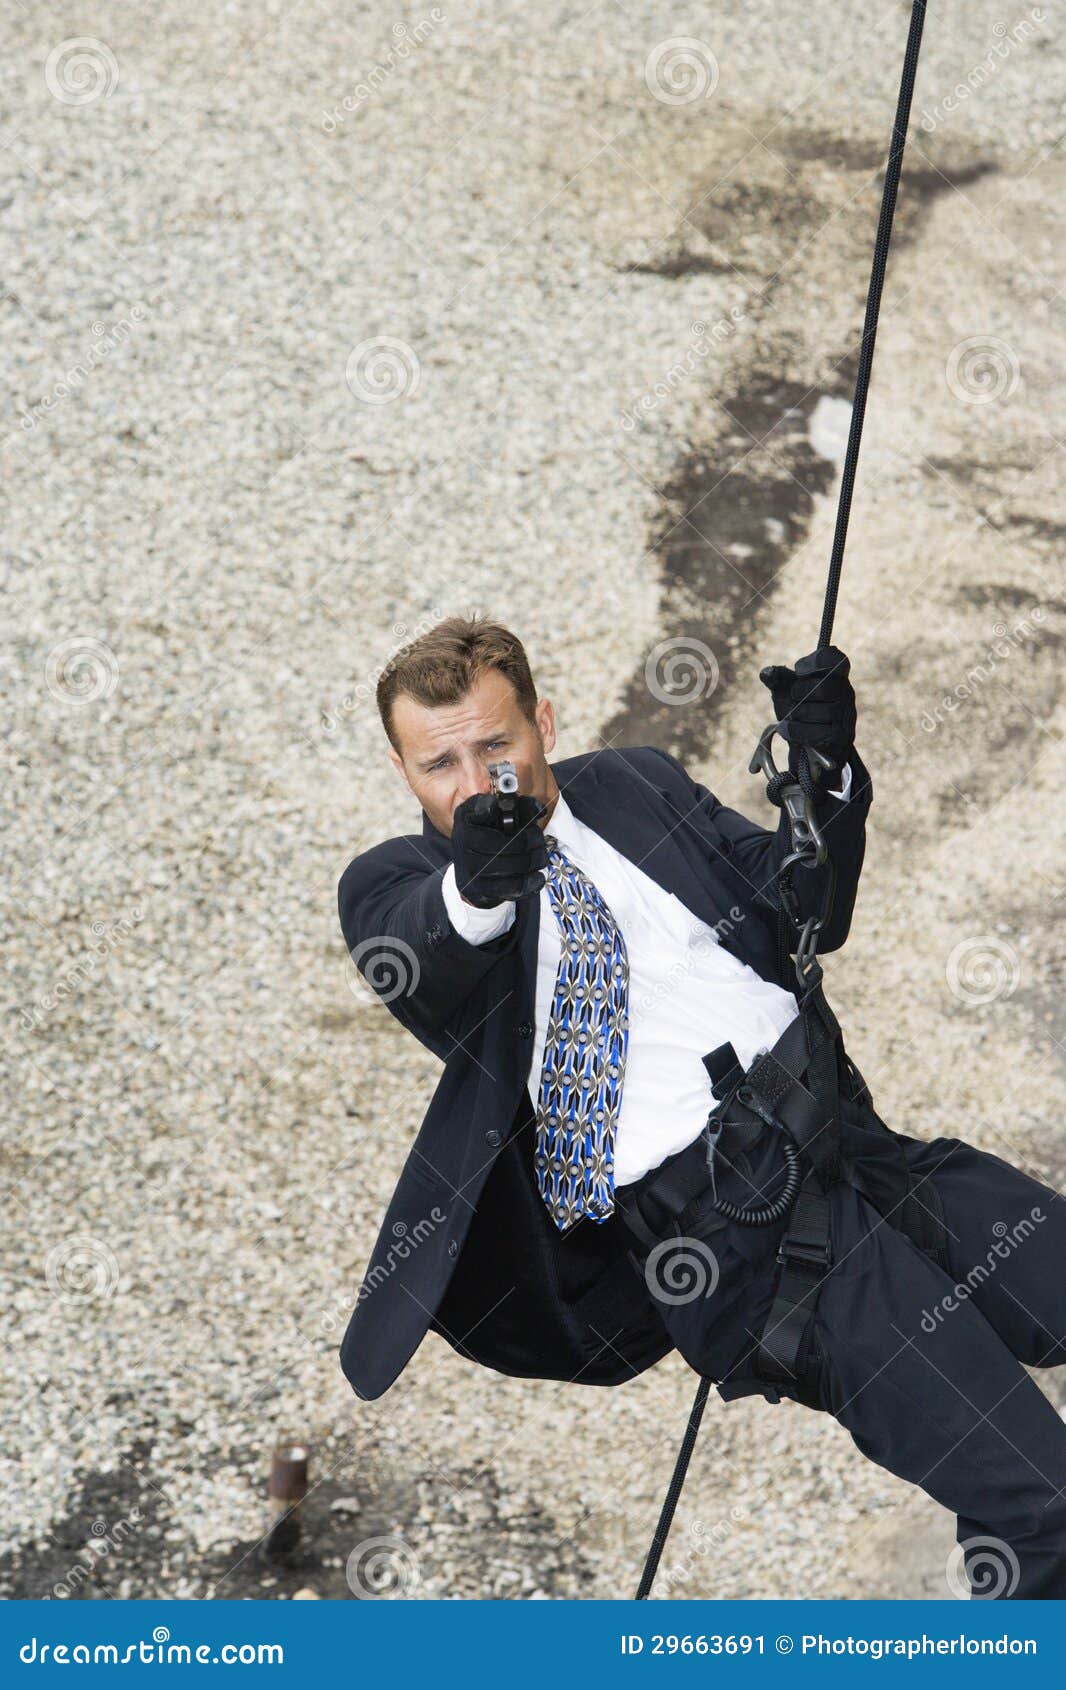 Male Spy Aiming Handgun while Rappelling Stock Image - Image of